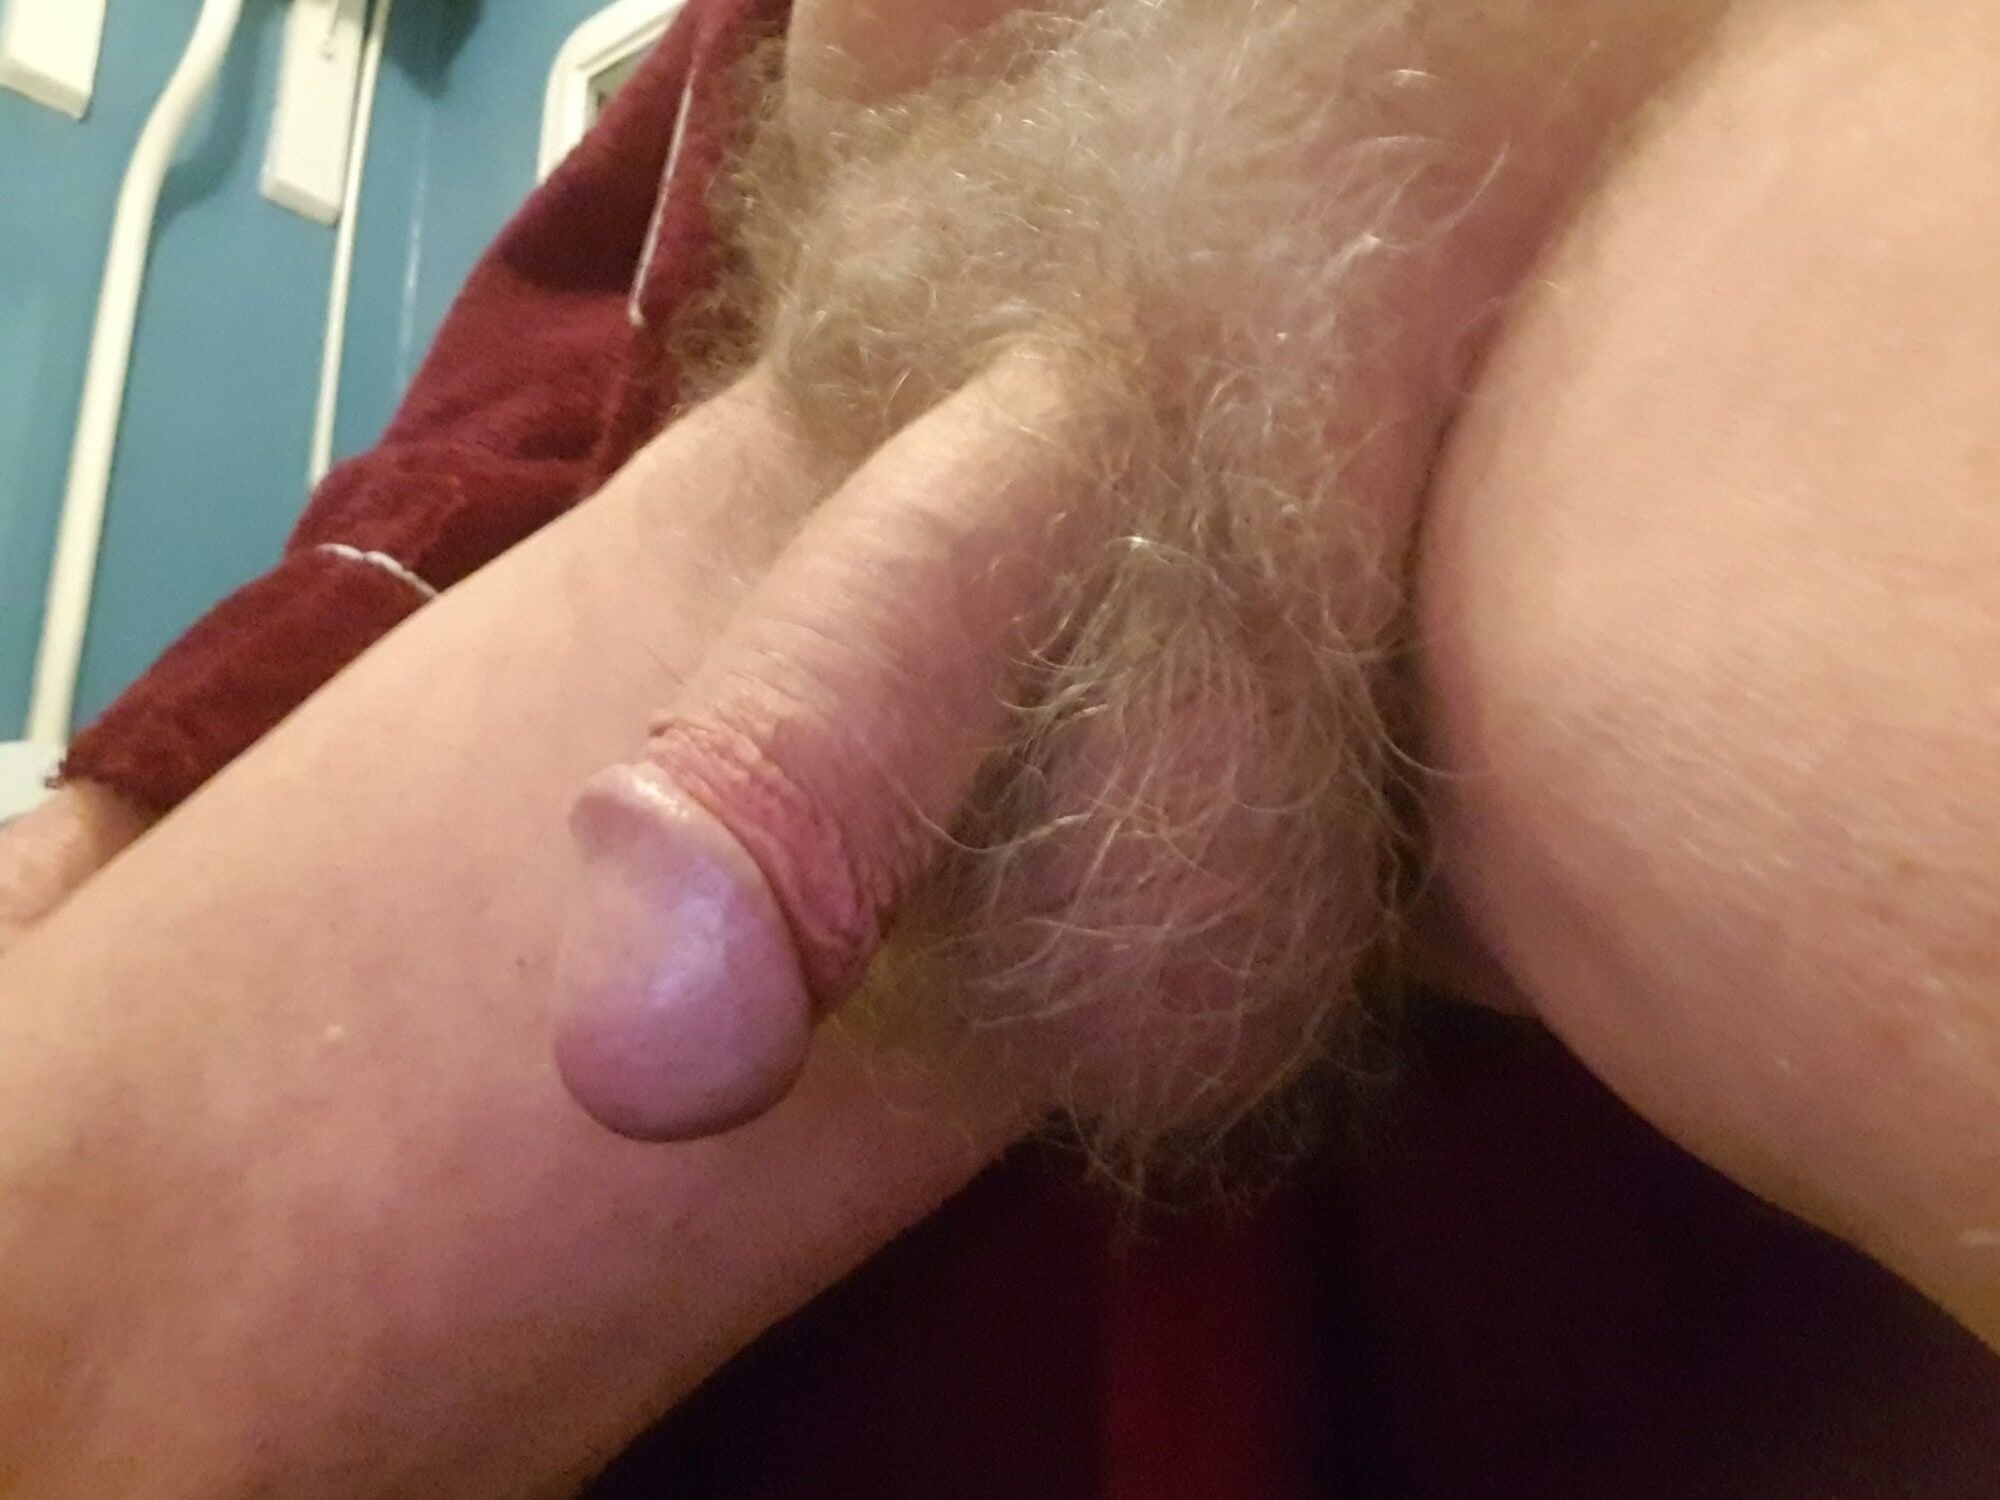 Just cock